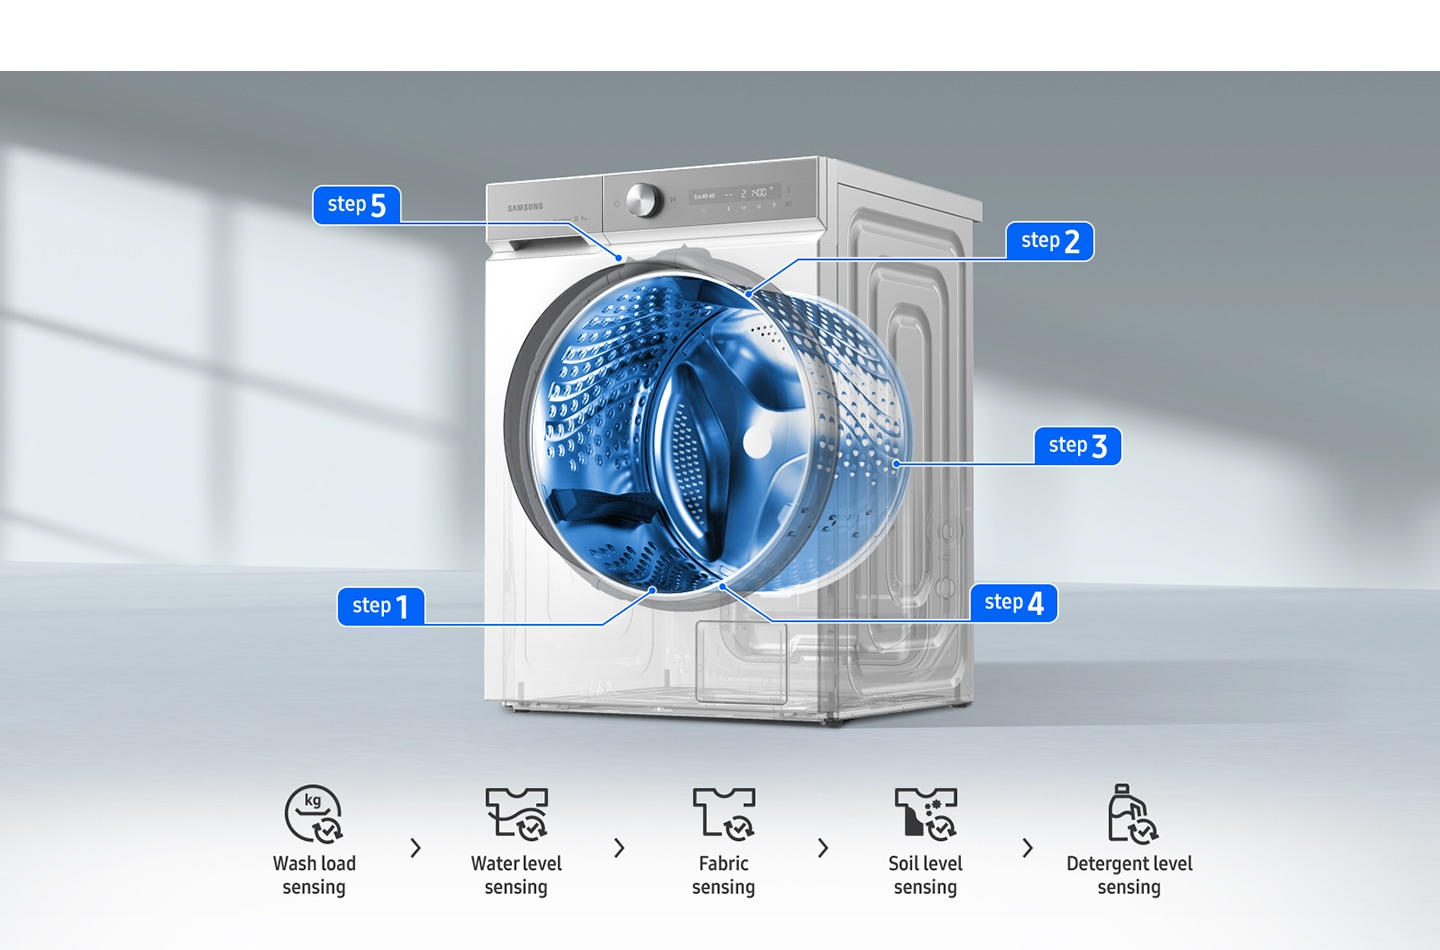 The location of the Step 1: wash load, Step 2: water level, Step 3: fabric sensing, Step 4: soil level, and Step 5: detergent level sensors appears on the transparent washer in order. In Step 4 , AI changes the time depending on soil level and users can control it with SmartThings app.